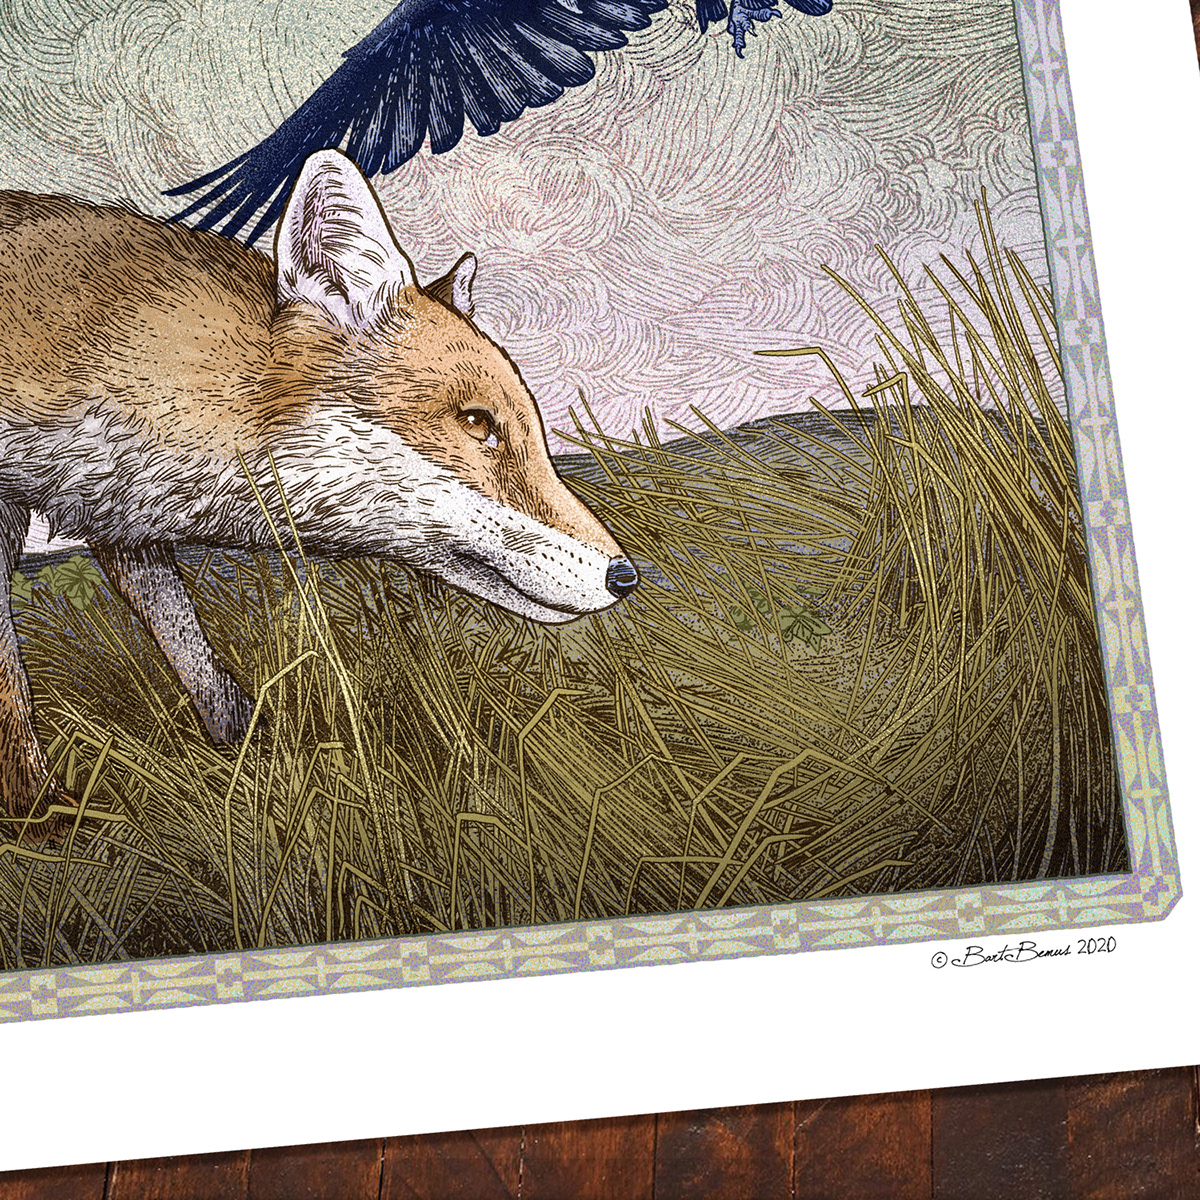 An illustration of a Fox and a Crow. - lower right